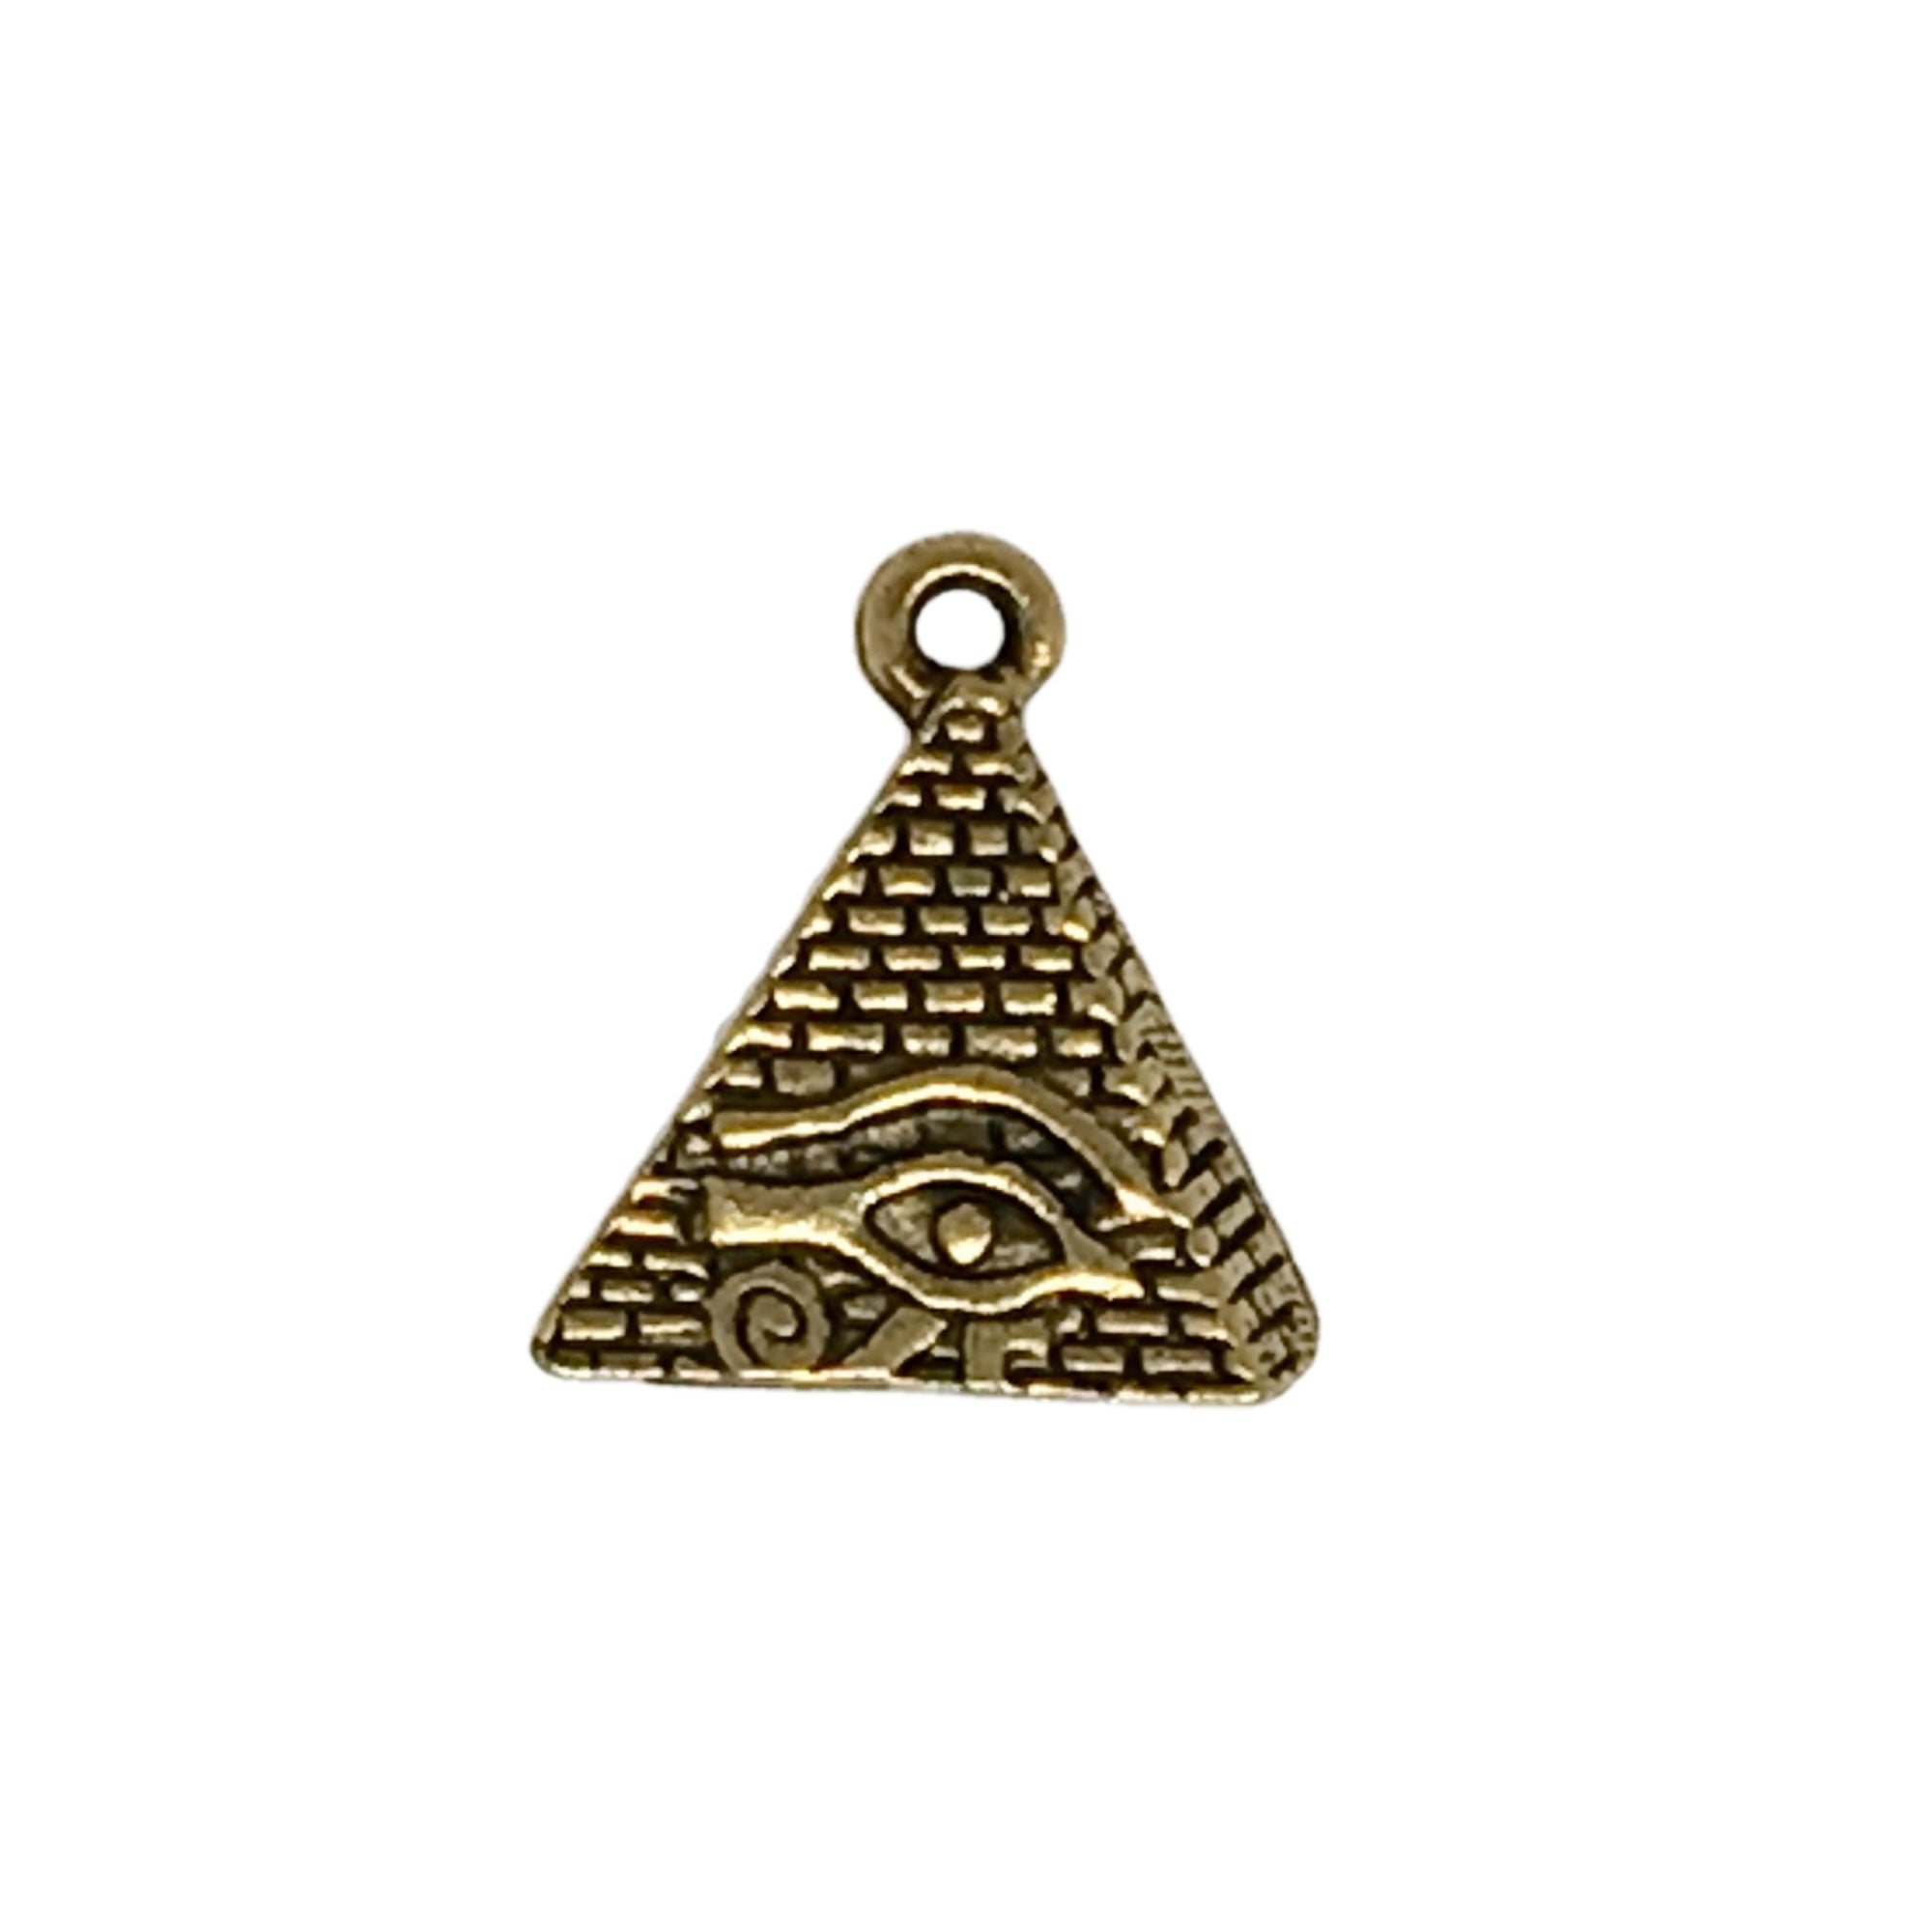 Eye of Horus Pyramid Charms - Qty of 5 Charms - 22kt Gold Plated Lead Free Pewter - American Made